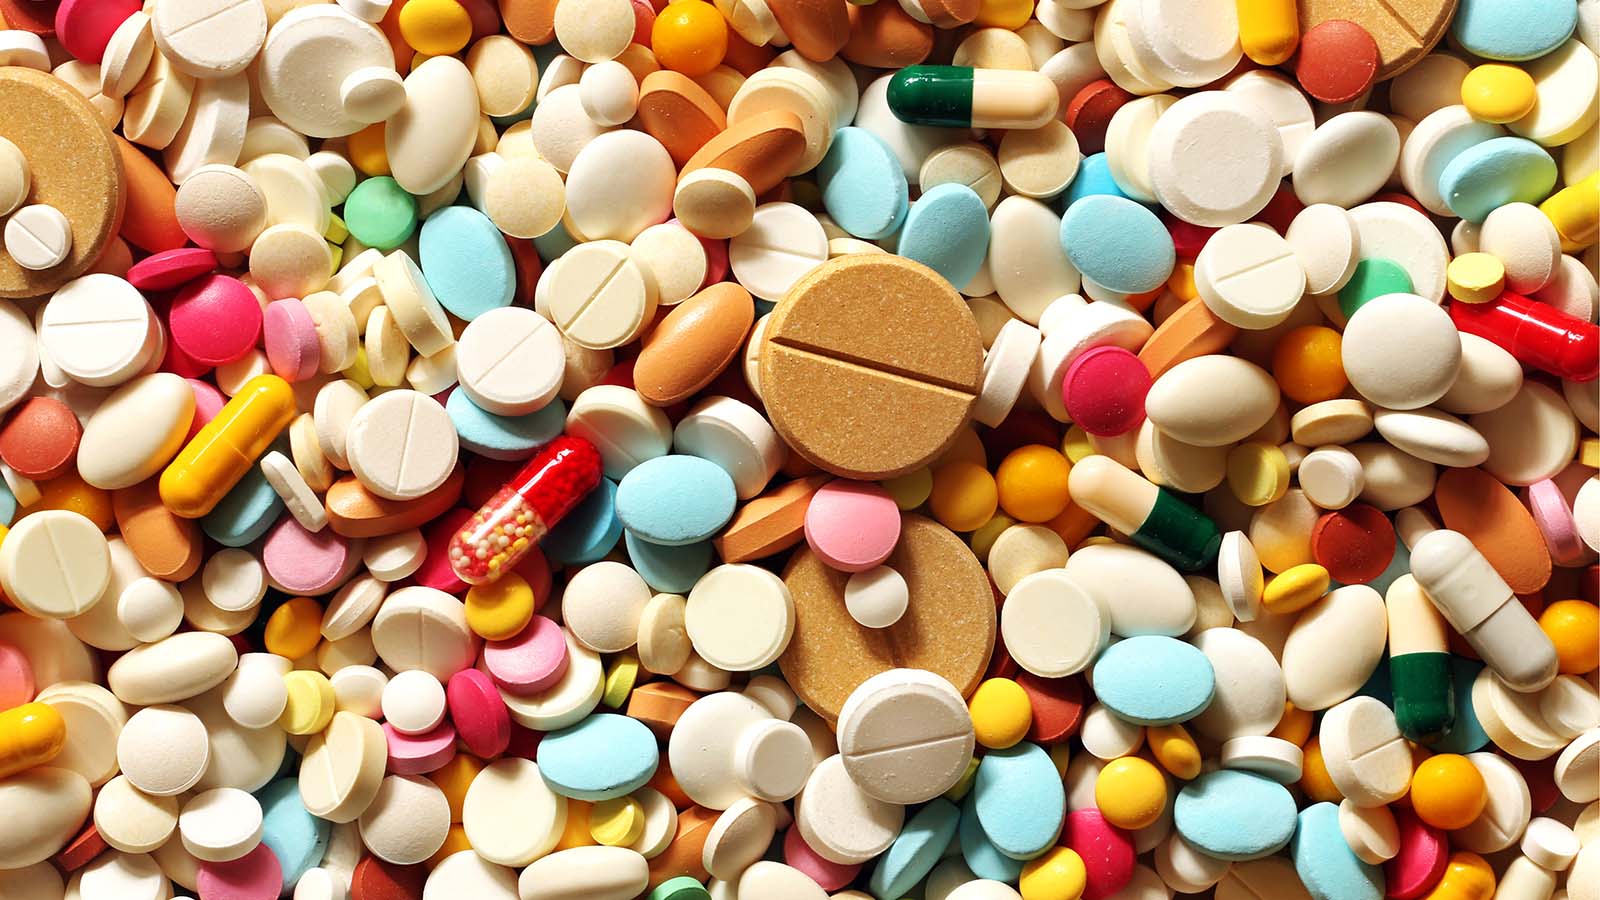 A pile of brightly colored pills in varying sizes and shapes representing PXMD stock.